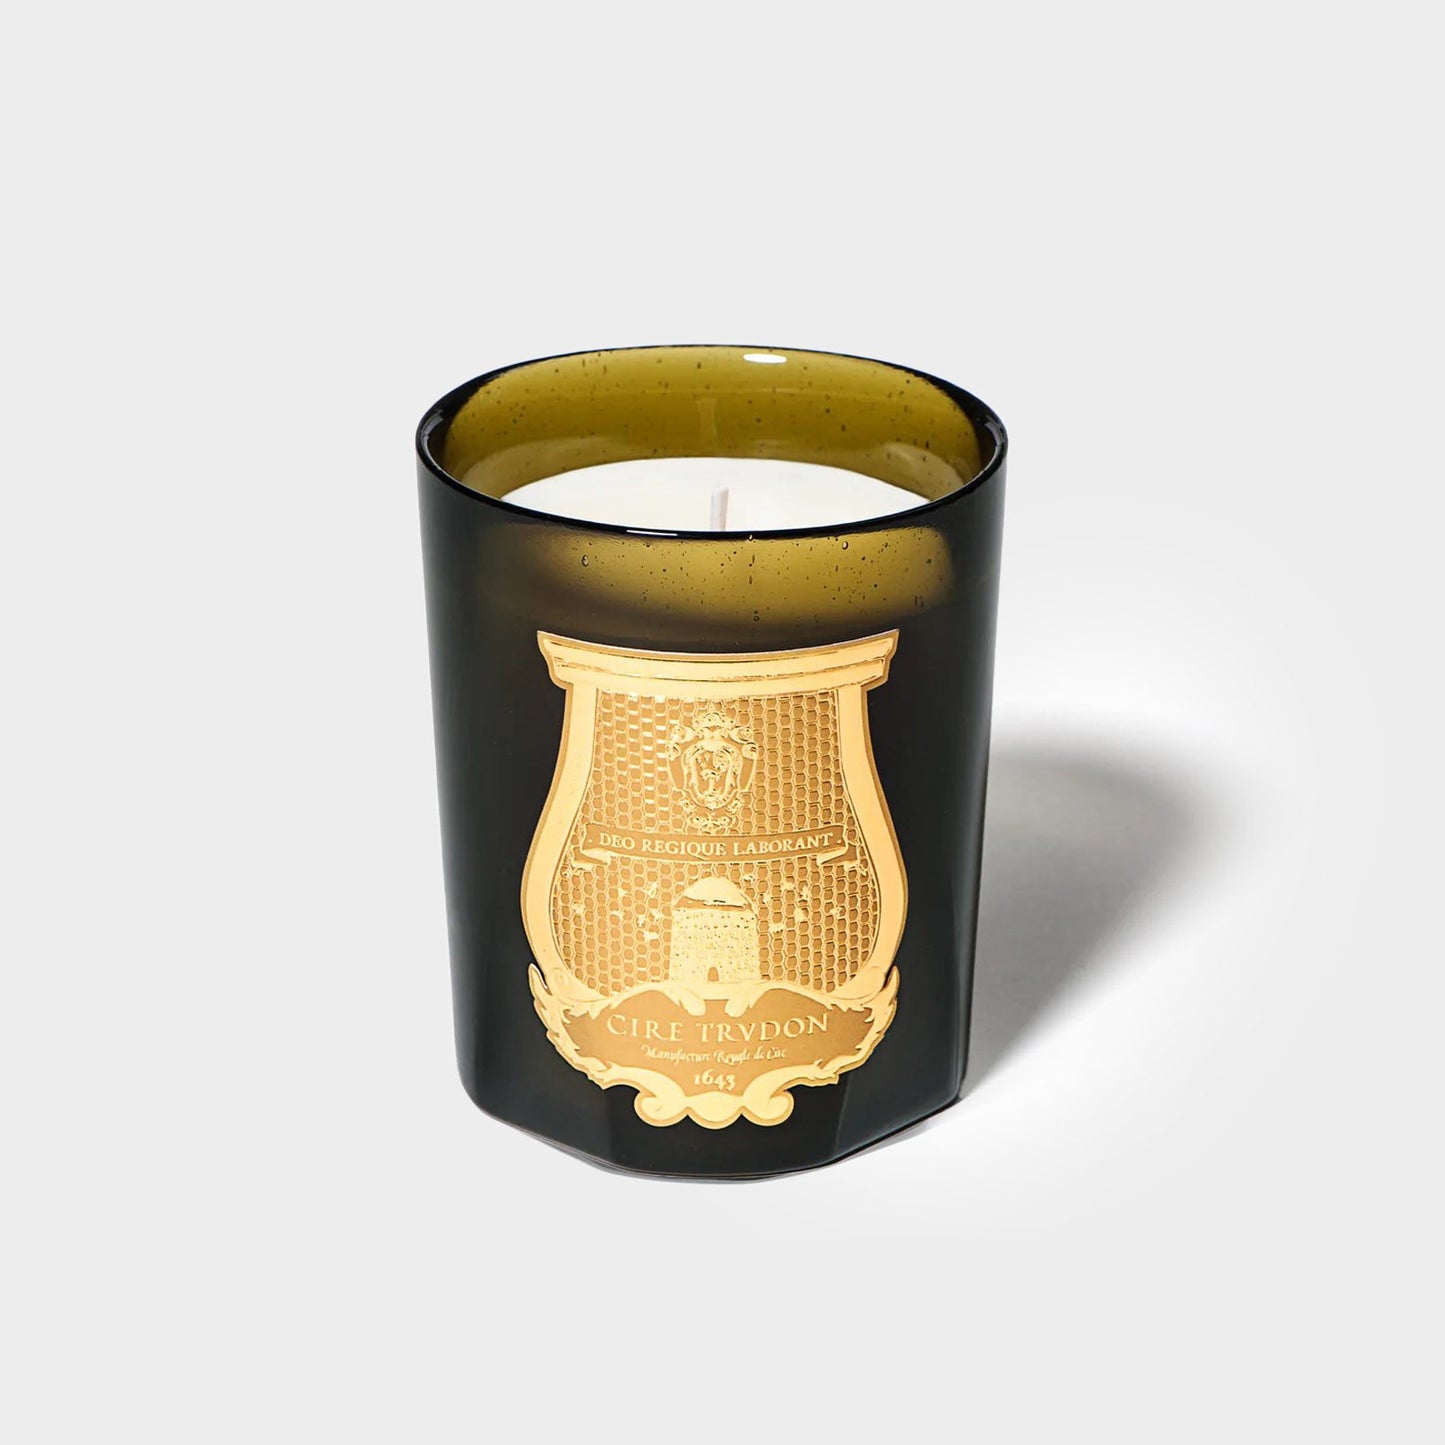 Trudon Ottoman Candle (Spiced Rose and Honeyed Tobacco)